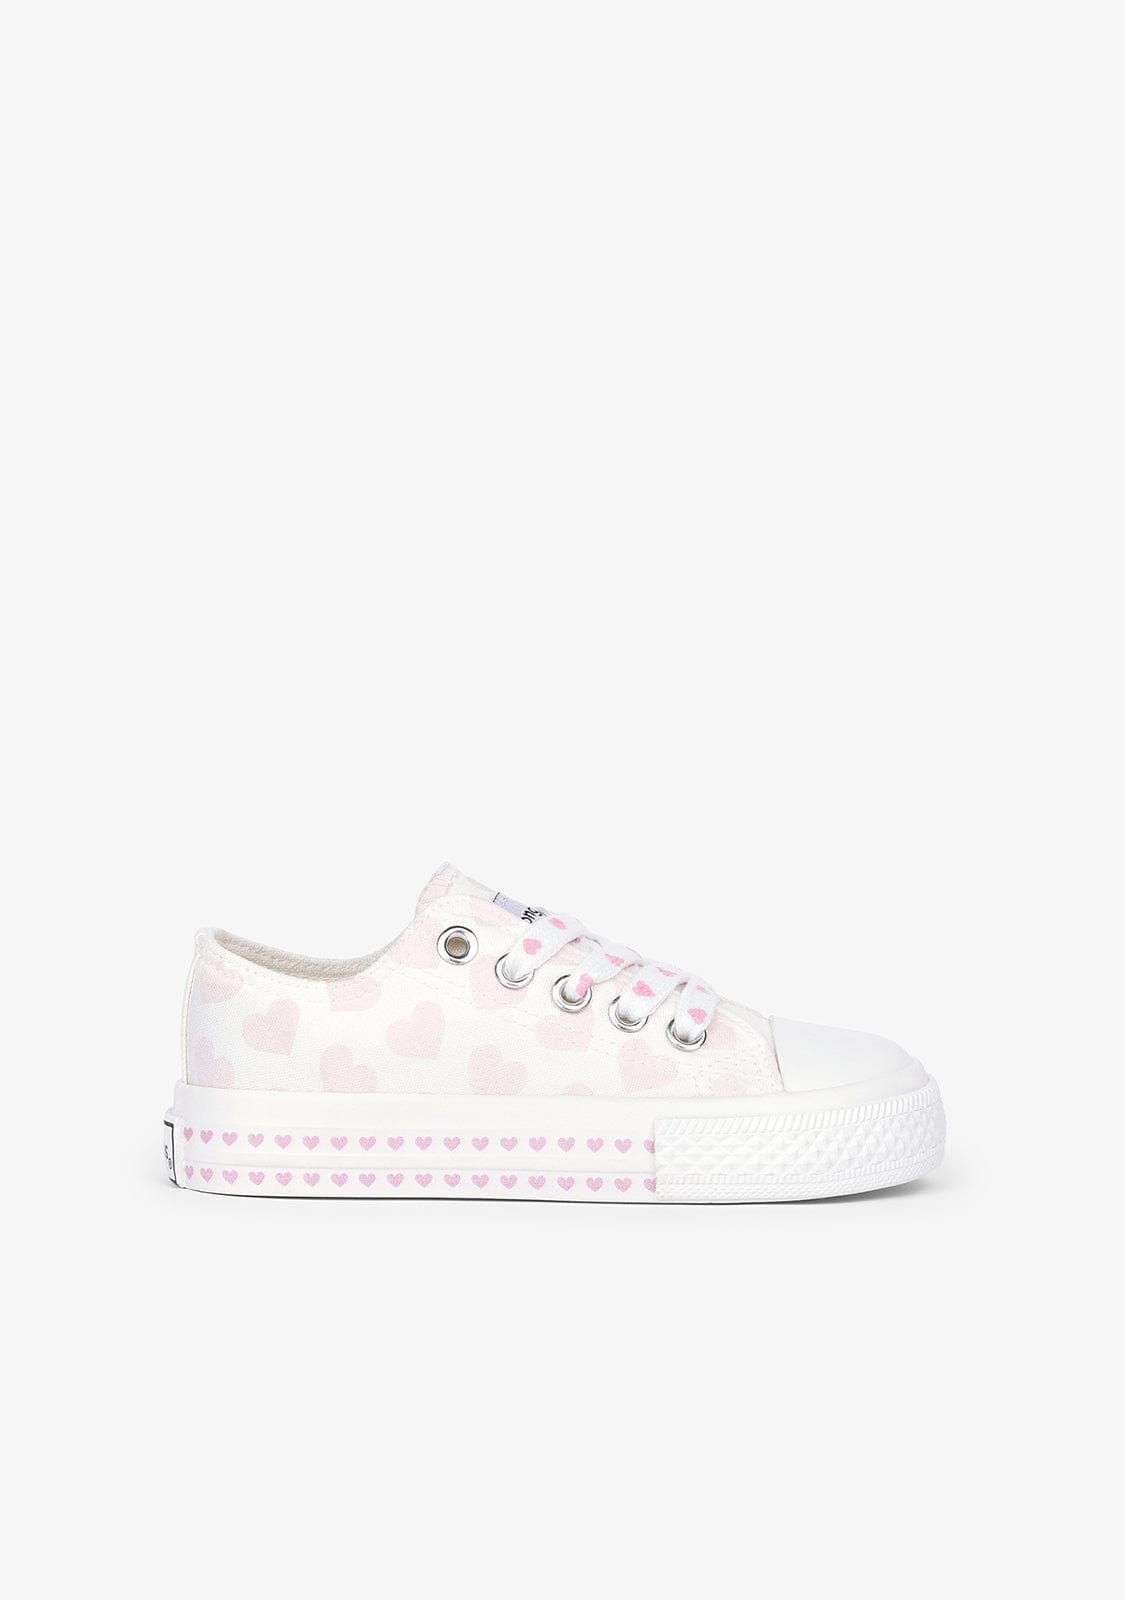 CONGUITOS Shoes Girl's White Sunlight Sneakers